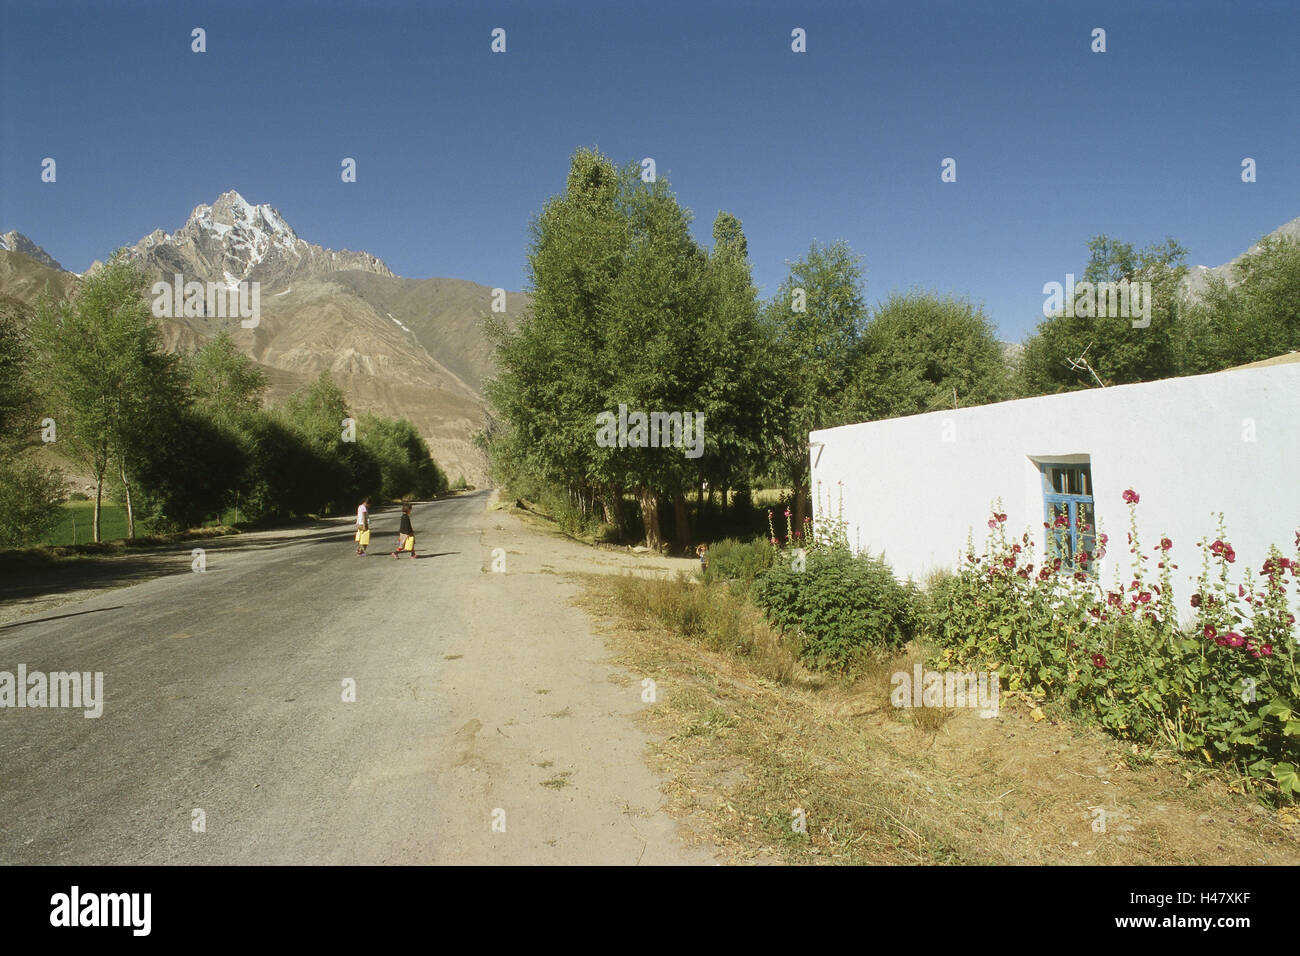 Tajikistan, the Pamir, Pamir highway, street, village, residential house, children, Asia, Central Asia, Central Asia, high mountain country, Hochgebirge, the Pamir mountains, traffic route, highway, traffic facility, avenue, person, Pamiri, house, Pamiri house, architecture, flat roof, typically, traditionally, remotely, rurally, mountains, scenery, loneliness, Stock Photo